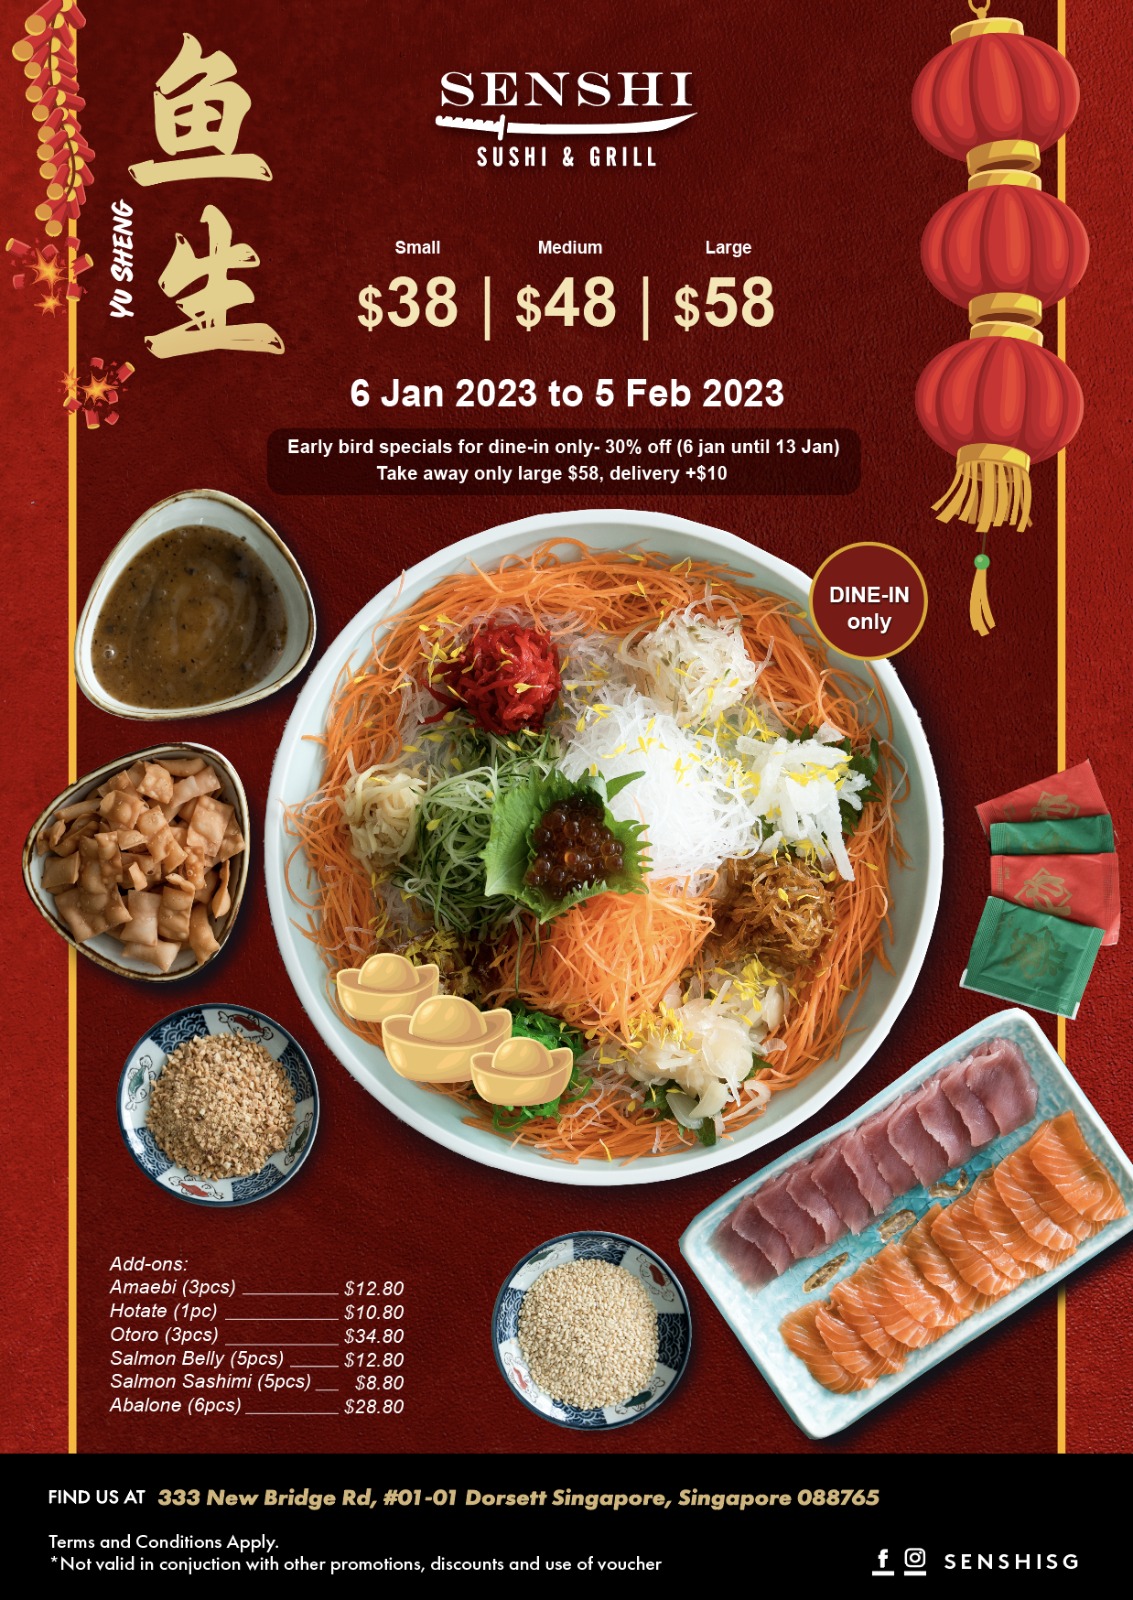 Lobang: MORE THAN 50 CNY 2023 F&B Deals - Your one stop guide to Yusheng, Pen Cai, Set Menus and more this Lunar New Year! - 43